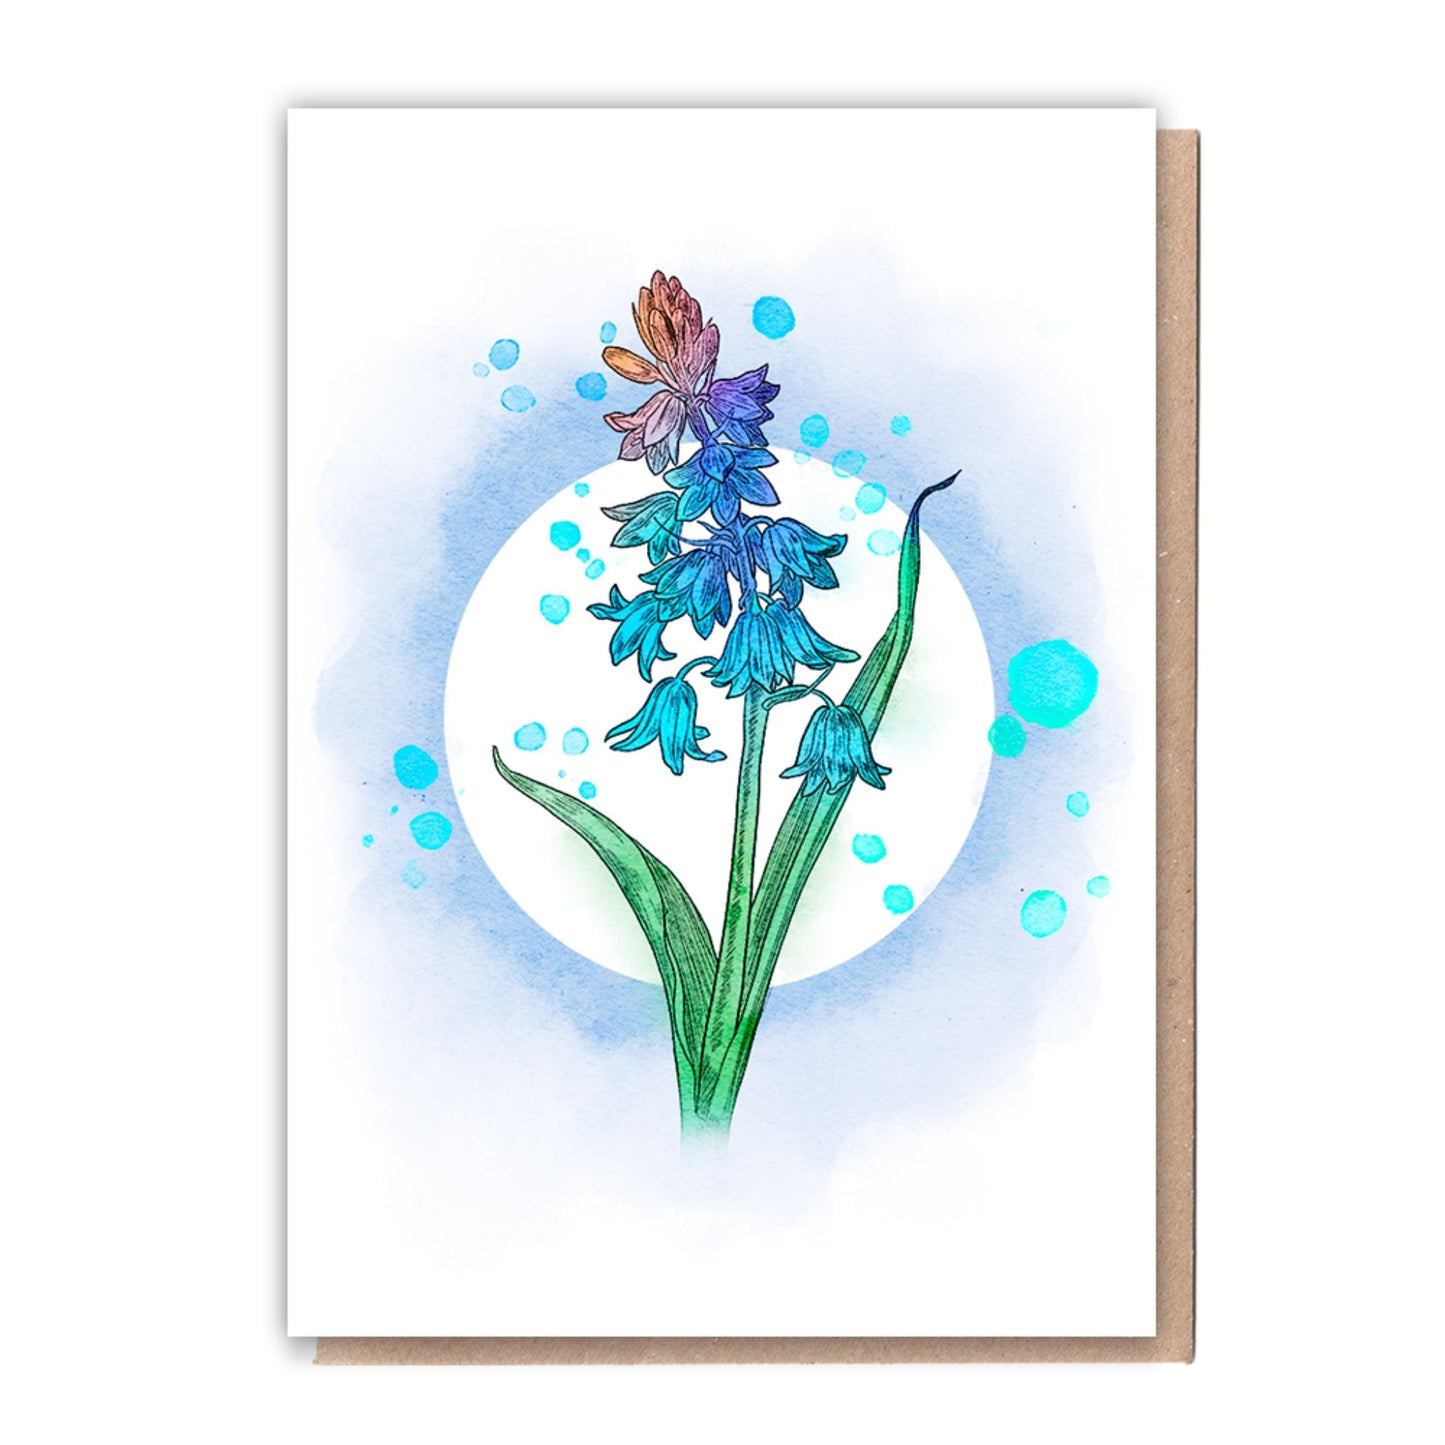 Recycled Greetings Card Box  5 Cards + 10 Trees Planted  Nature Lover - bluebells